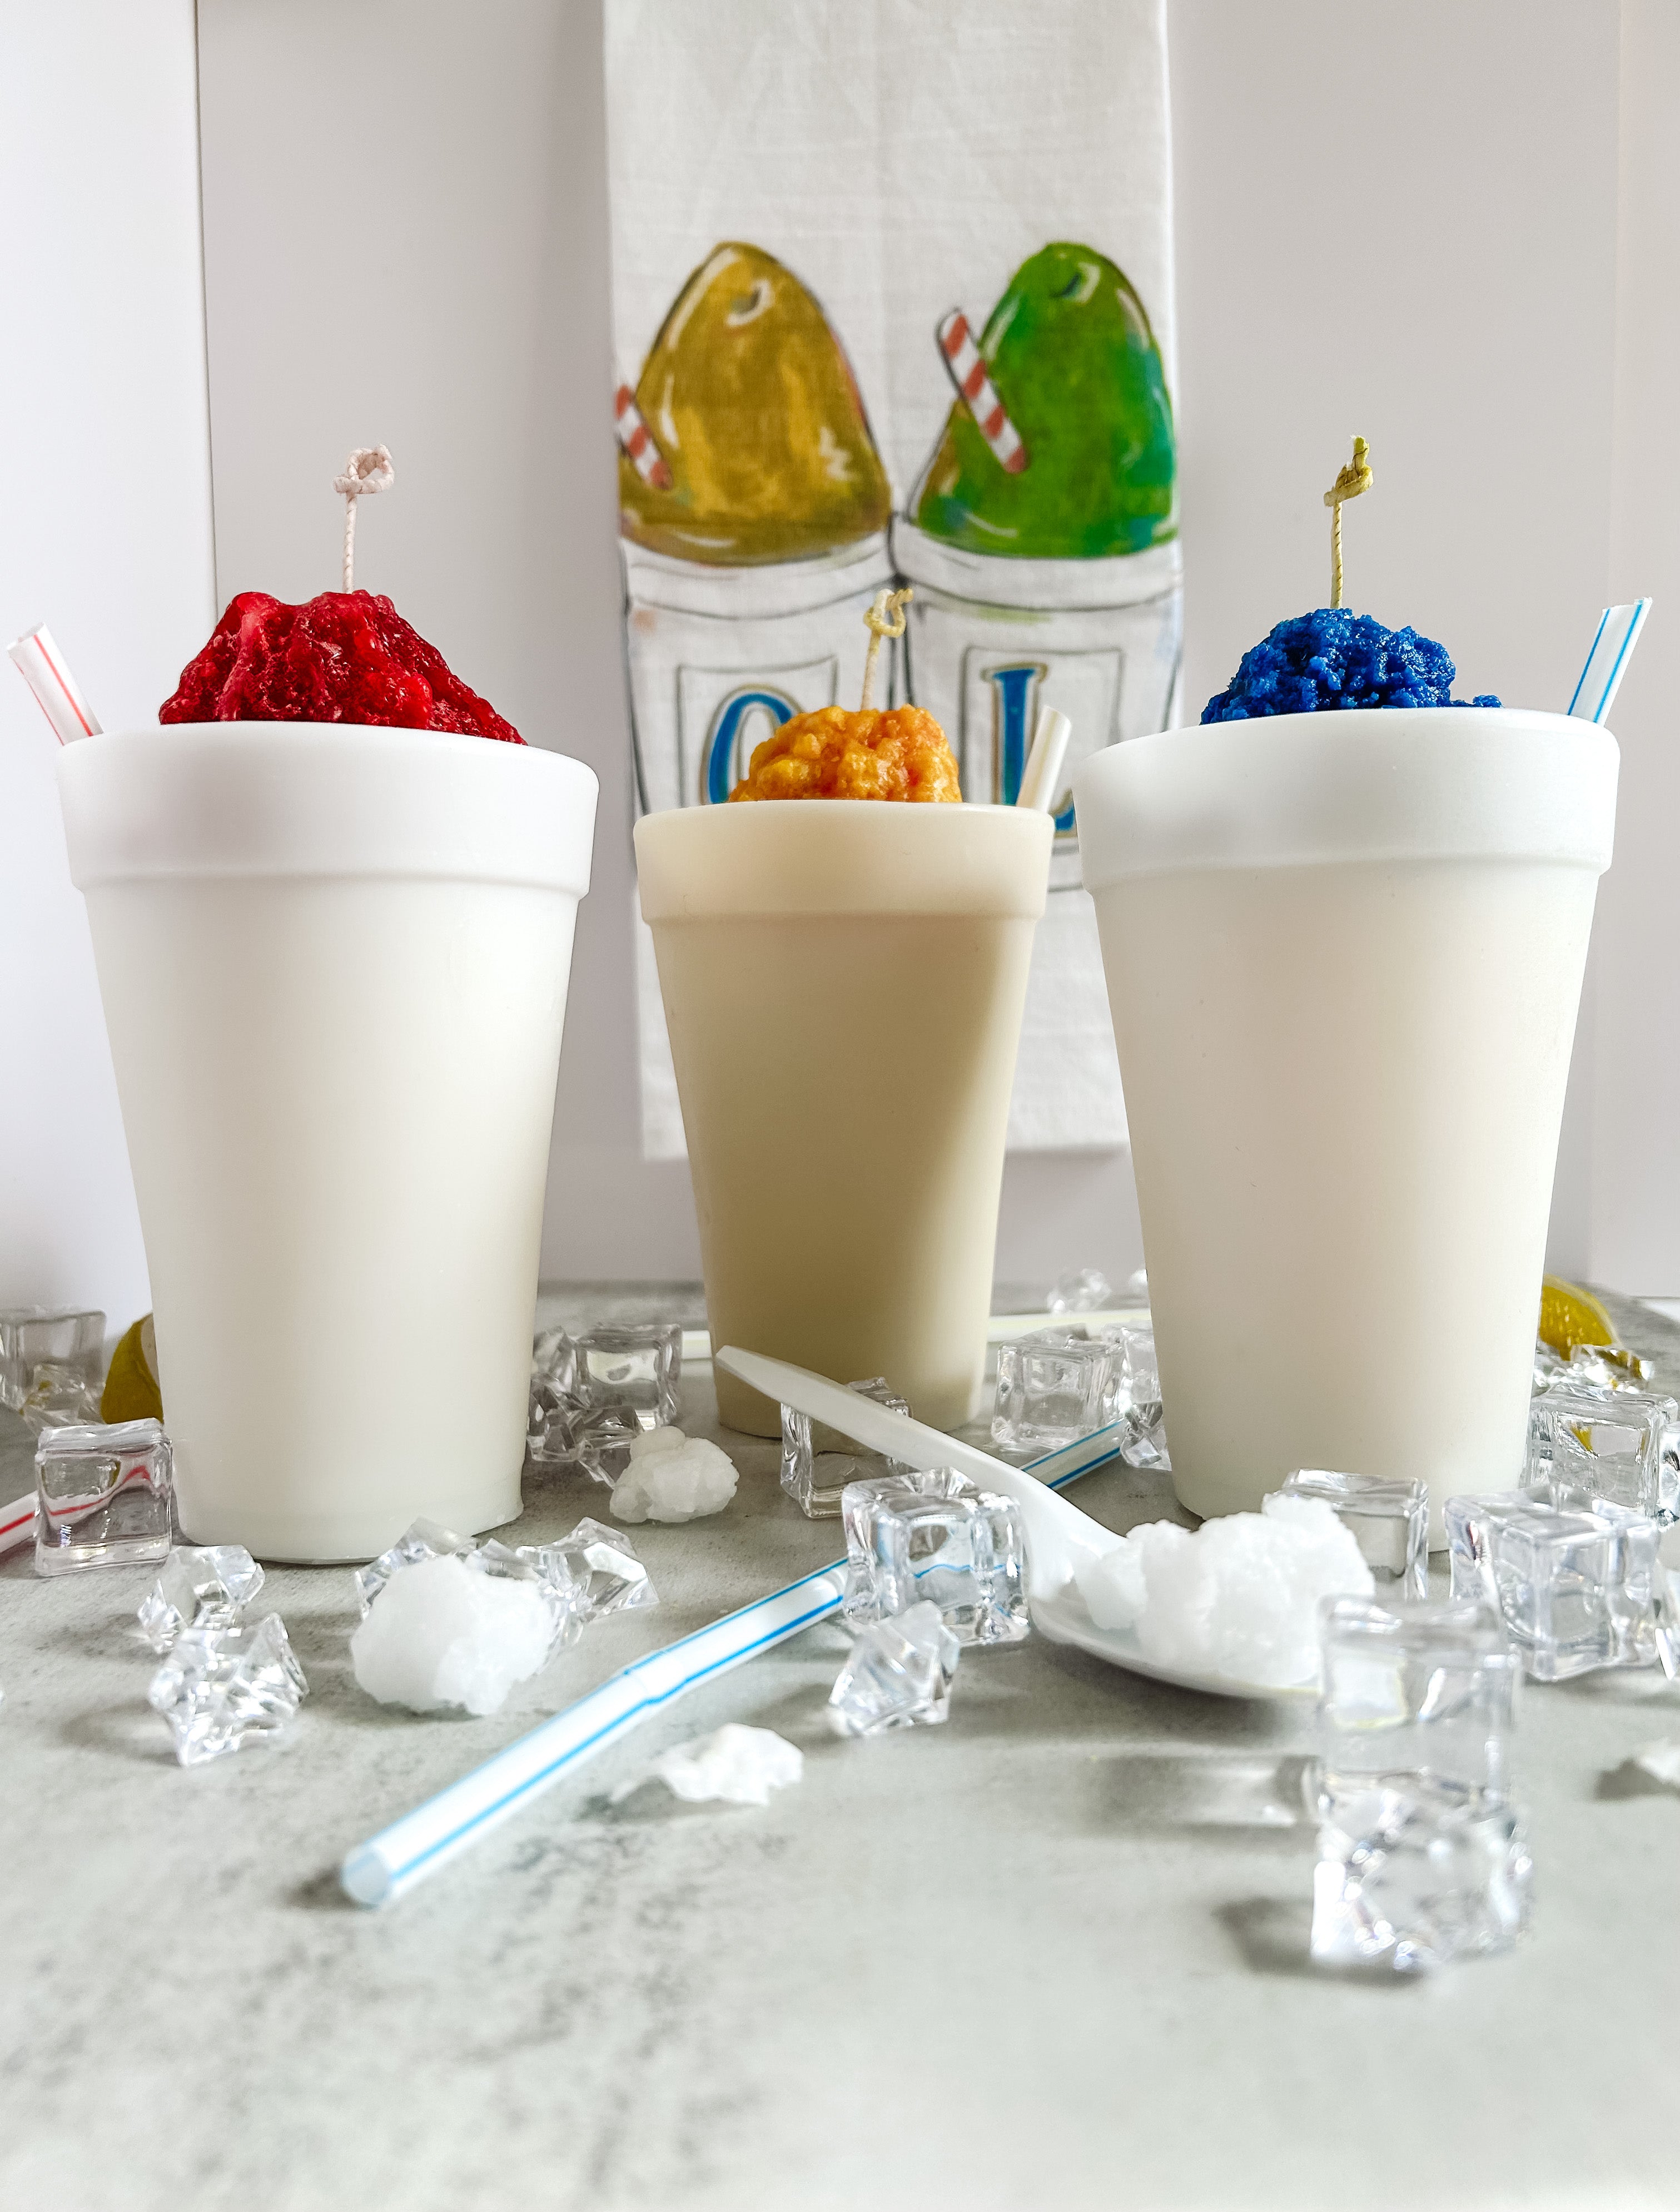 New Orleans Sno-Ball Novelty Candle